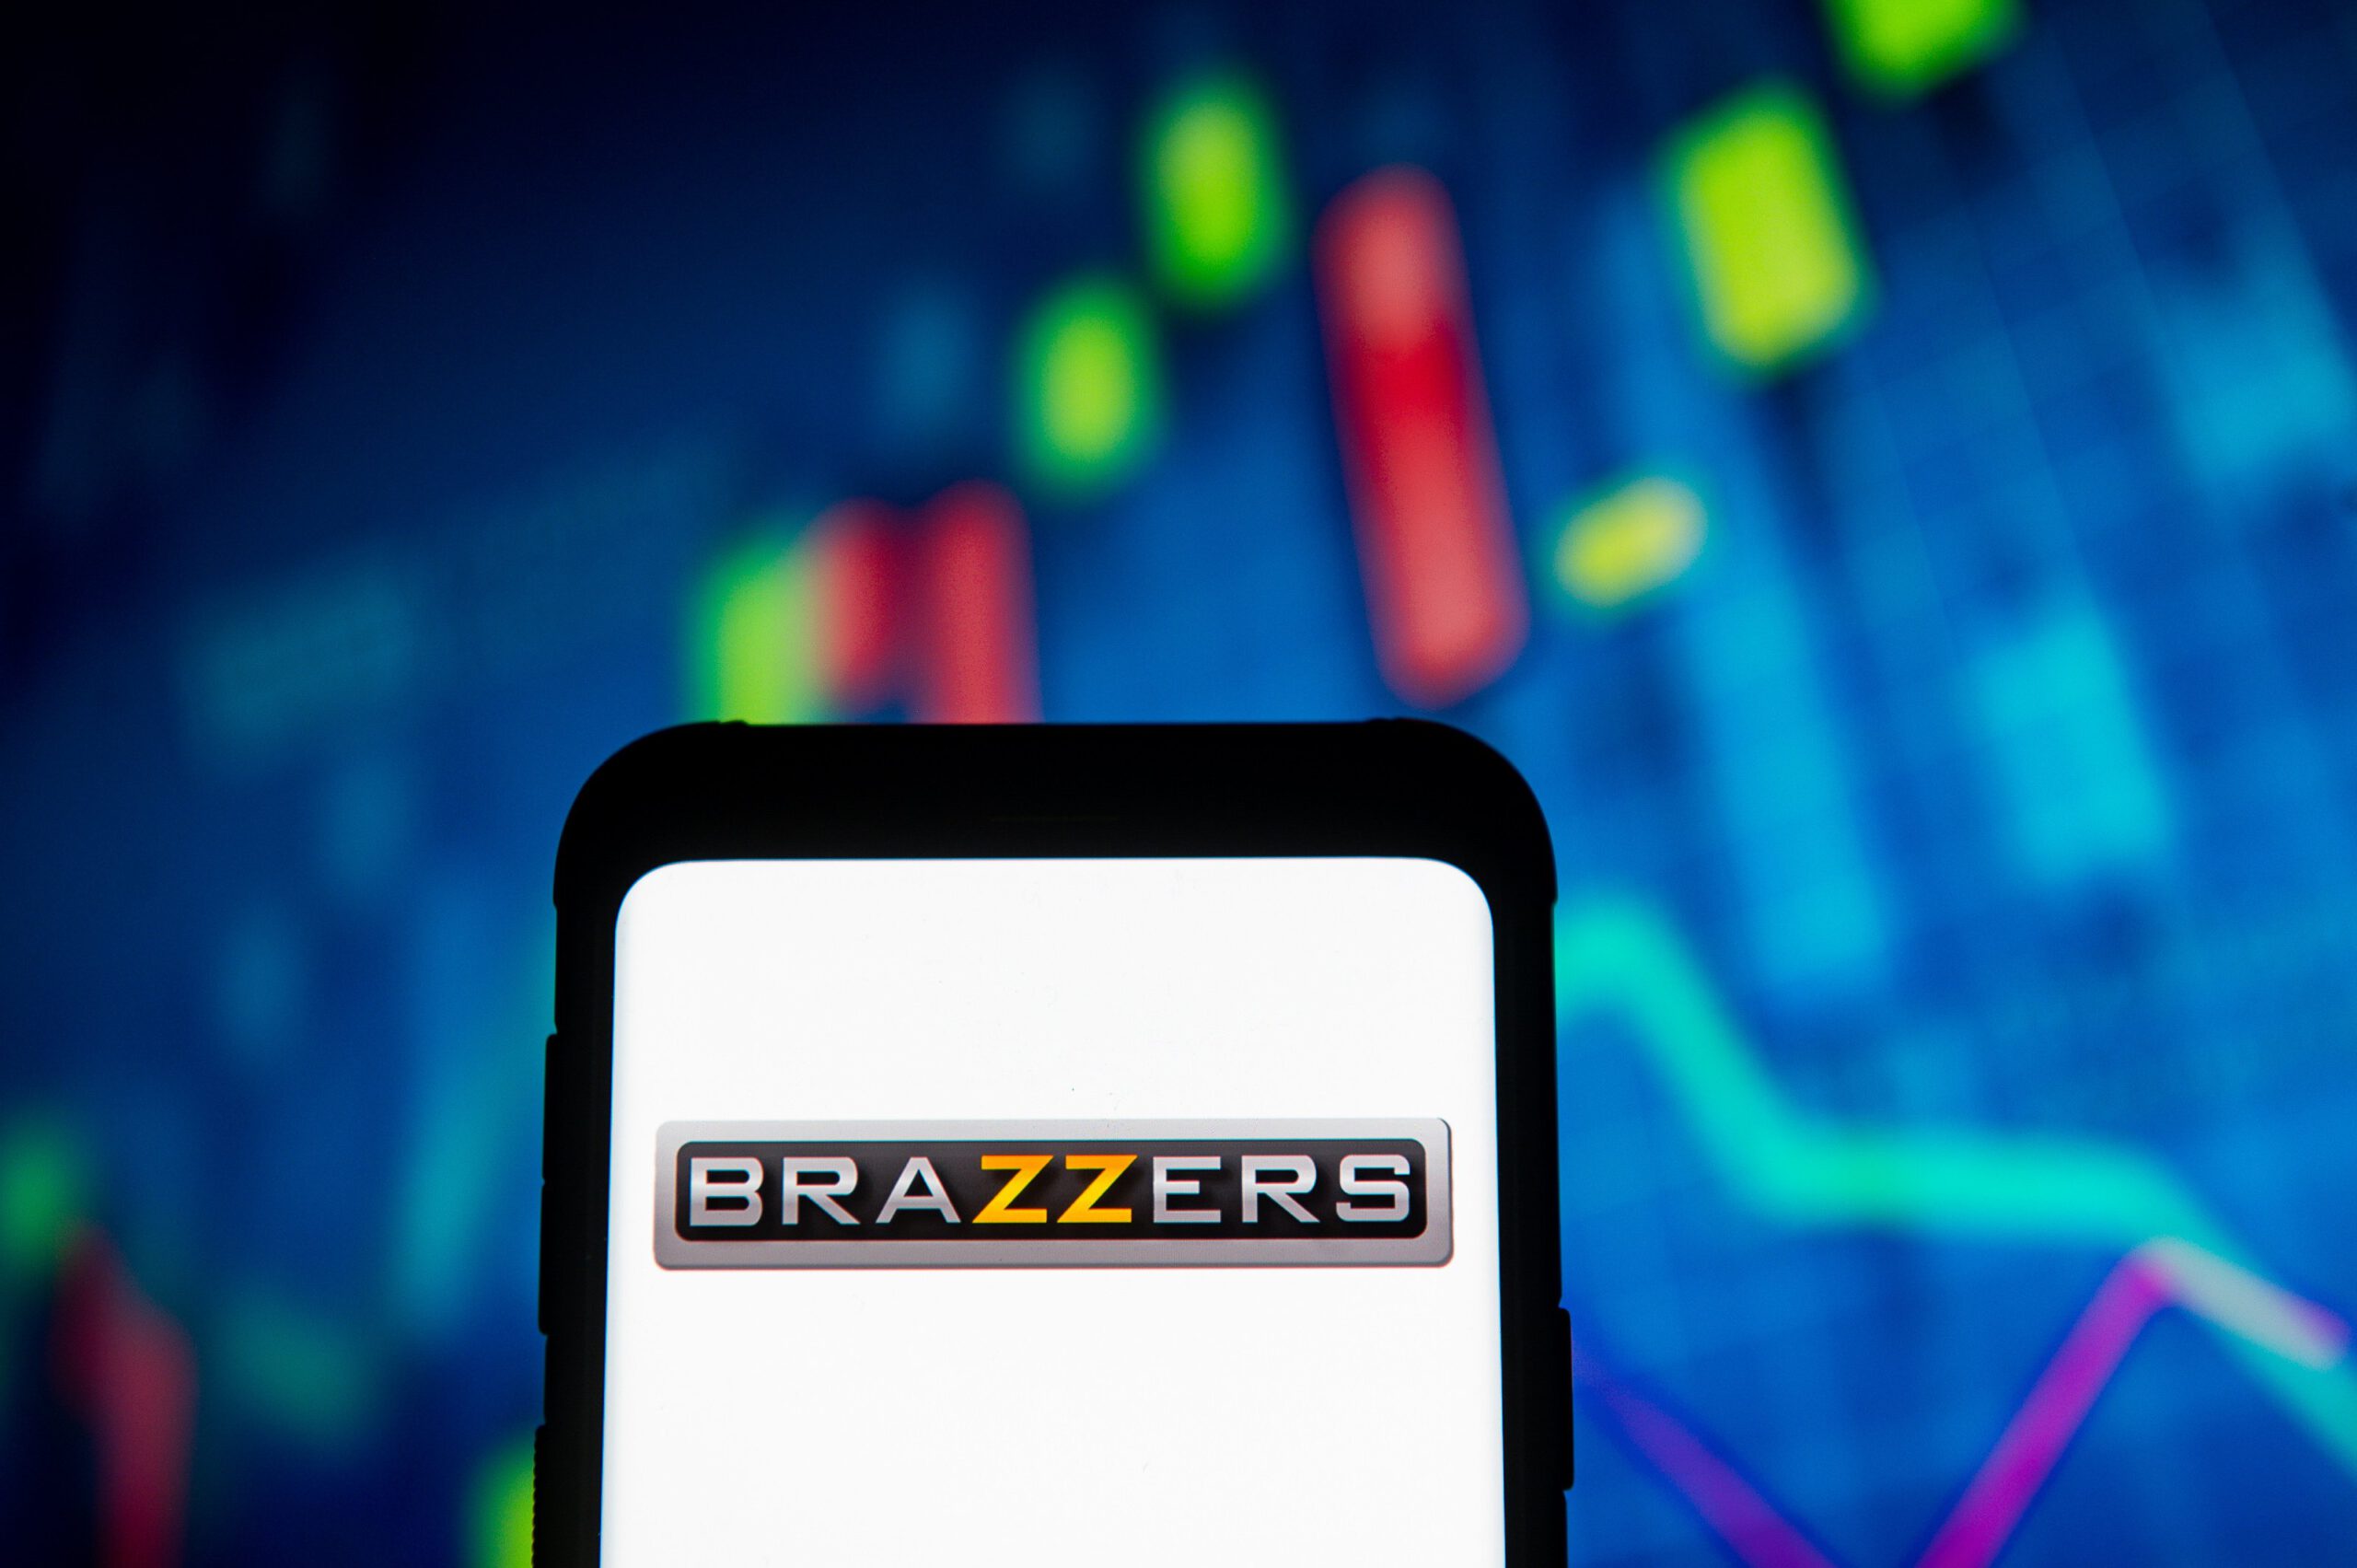 Brazzers logo seen displayed on a smartphone